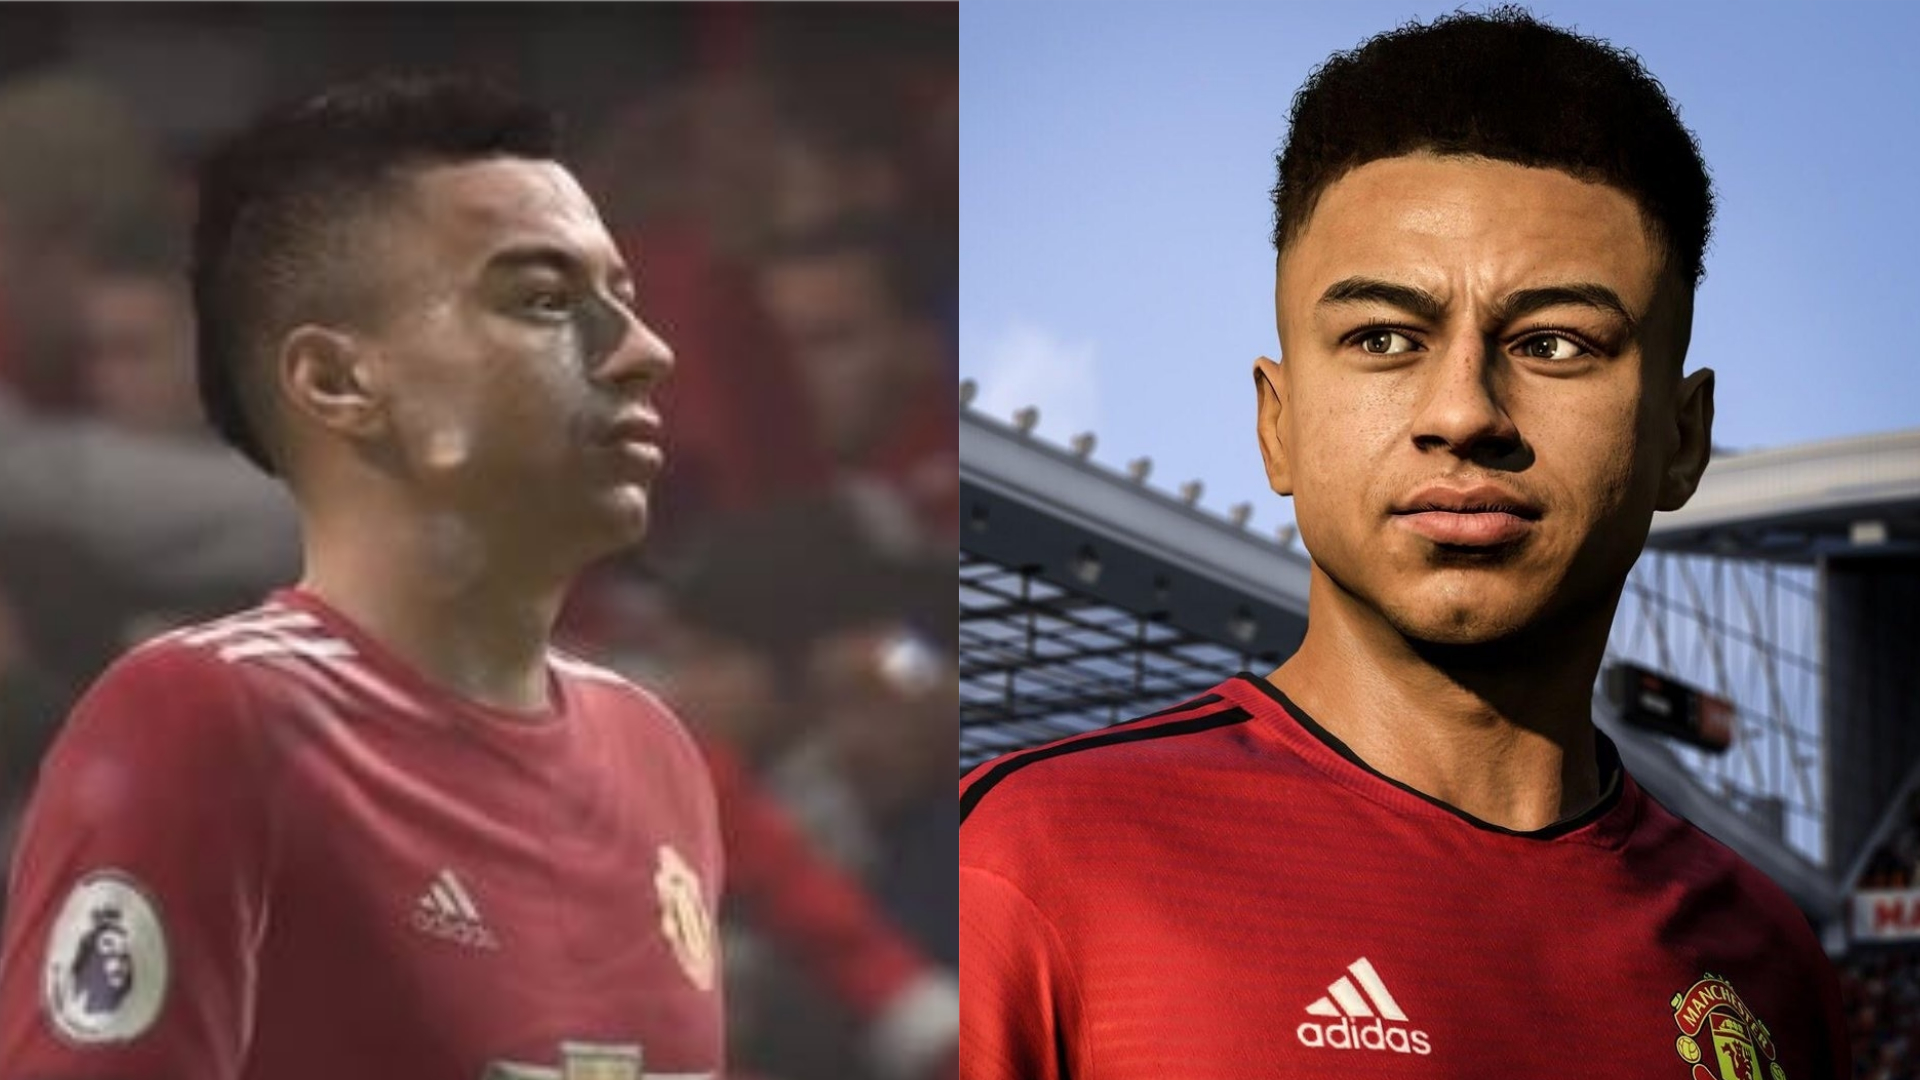 Lingard's hair before and after the update